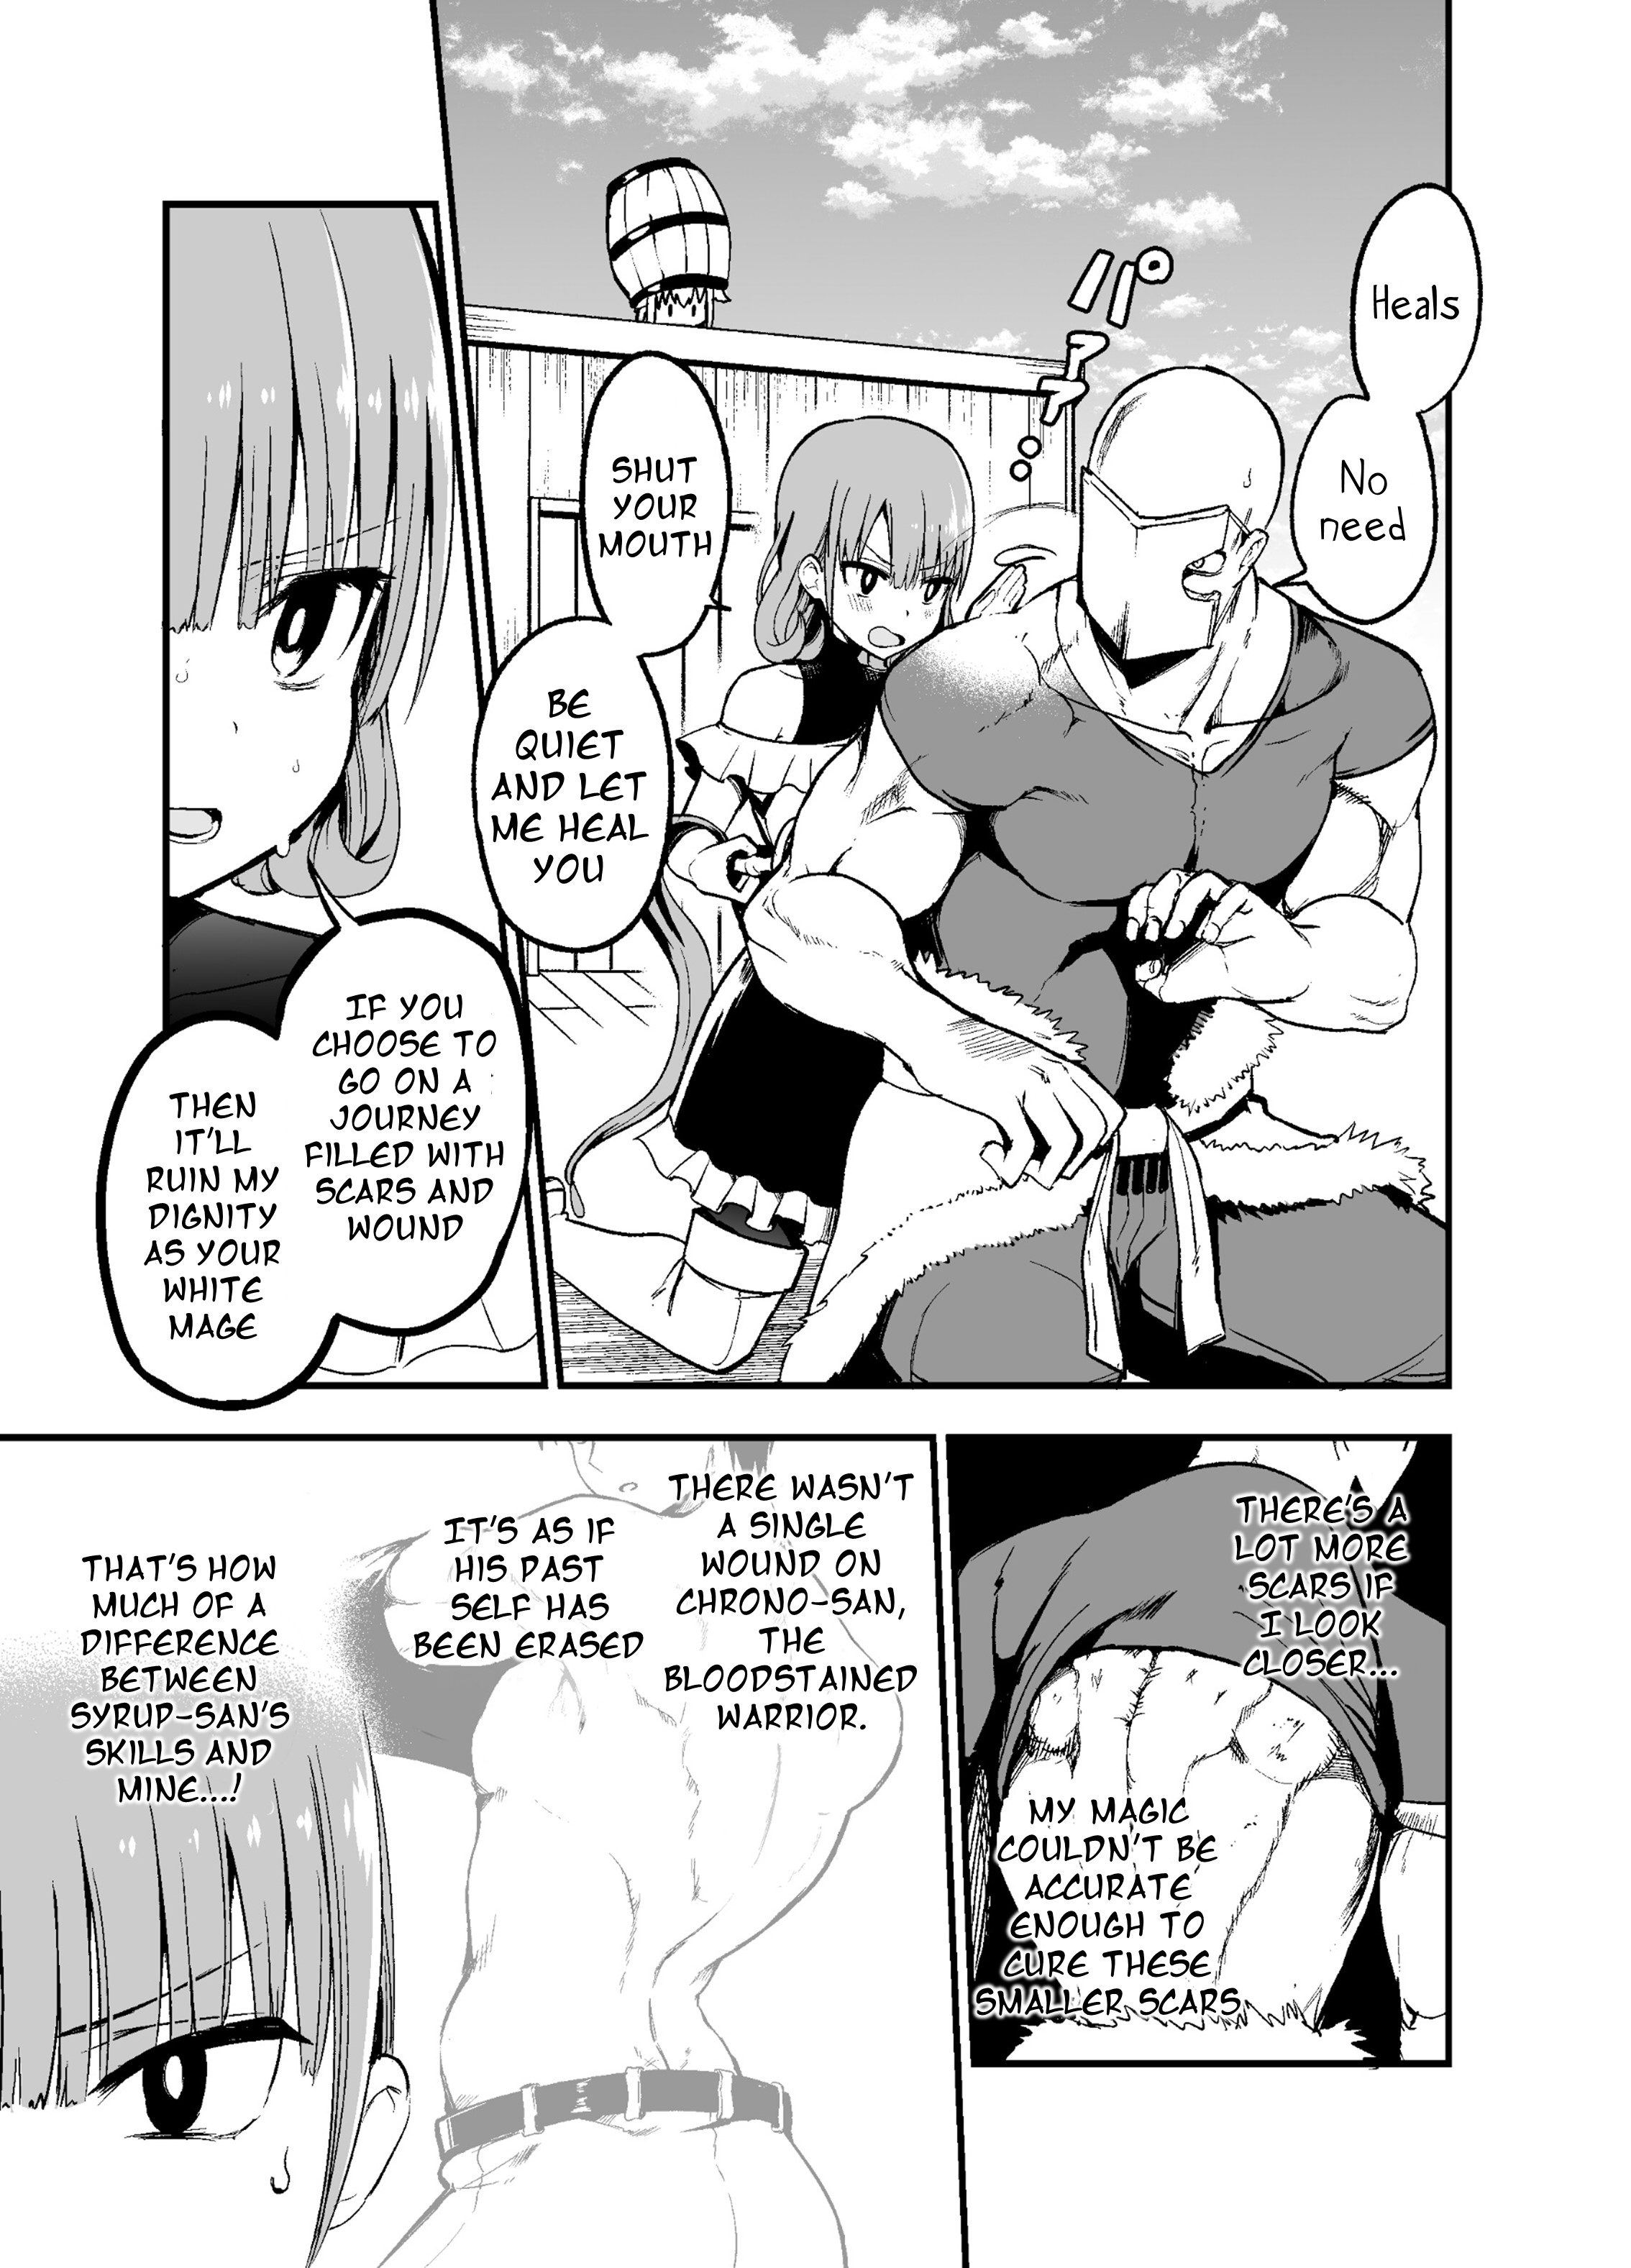 Shiro Madoushi Syrup-San Vol.1 Chapter 36: The White Mage And Respect - Picture 3